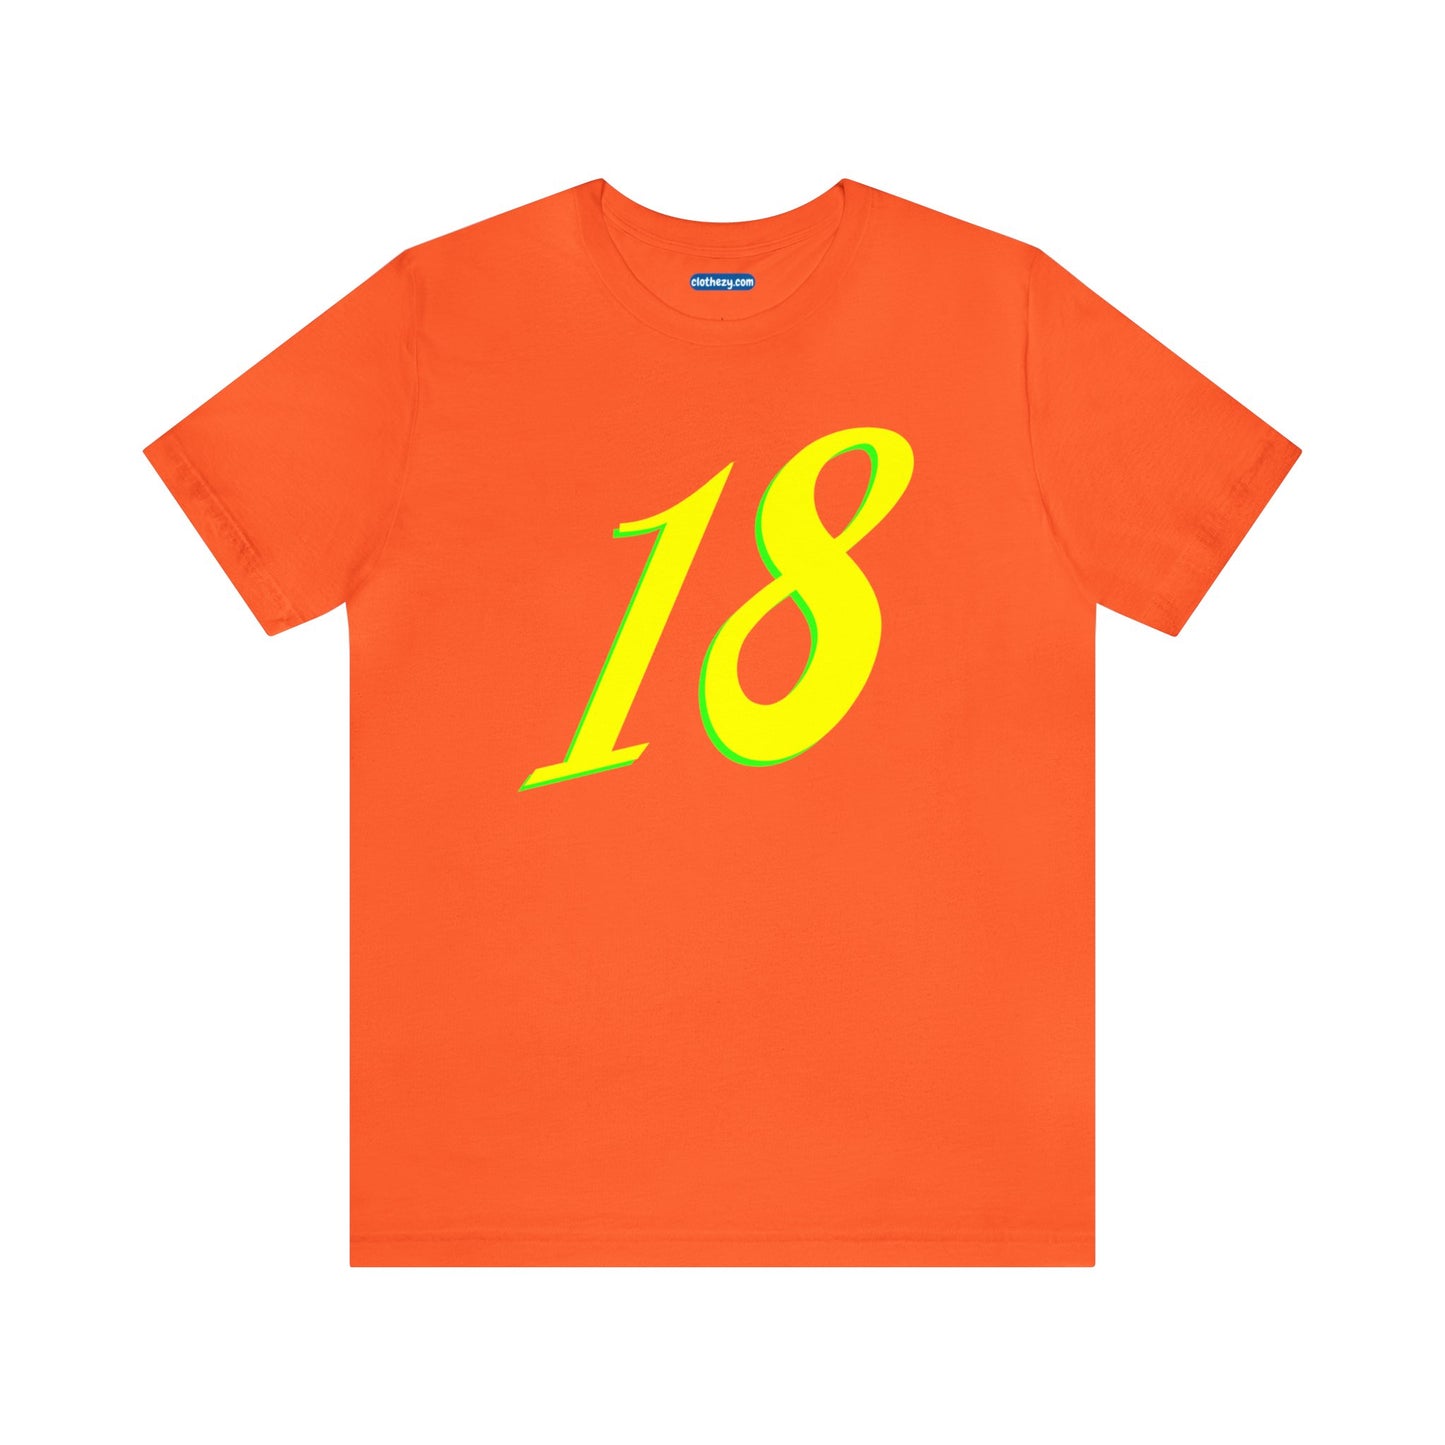 Number 18 Design - Soft Cotton Tee for birthdays and celebrations, Gift for friends and family, Multiple Options by clothezy.com in Orange Size Small - Buy Now